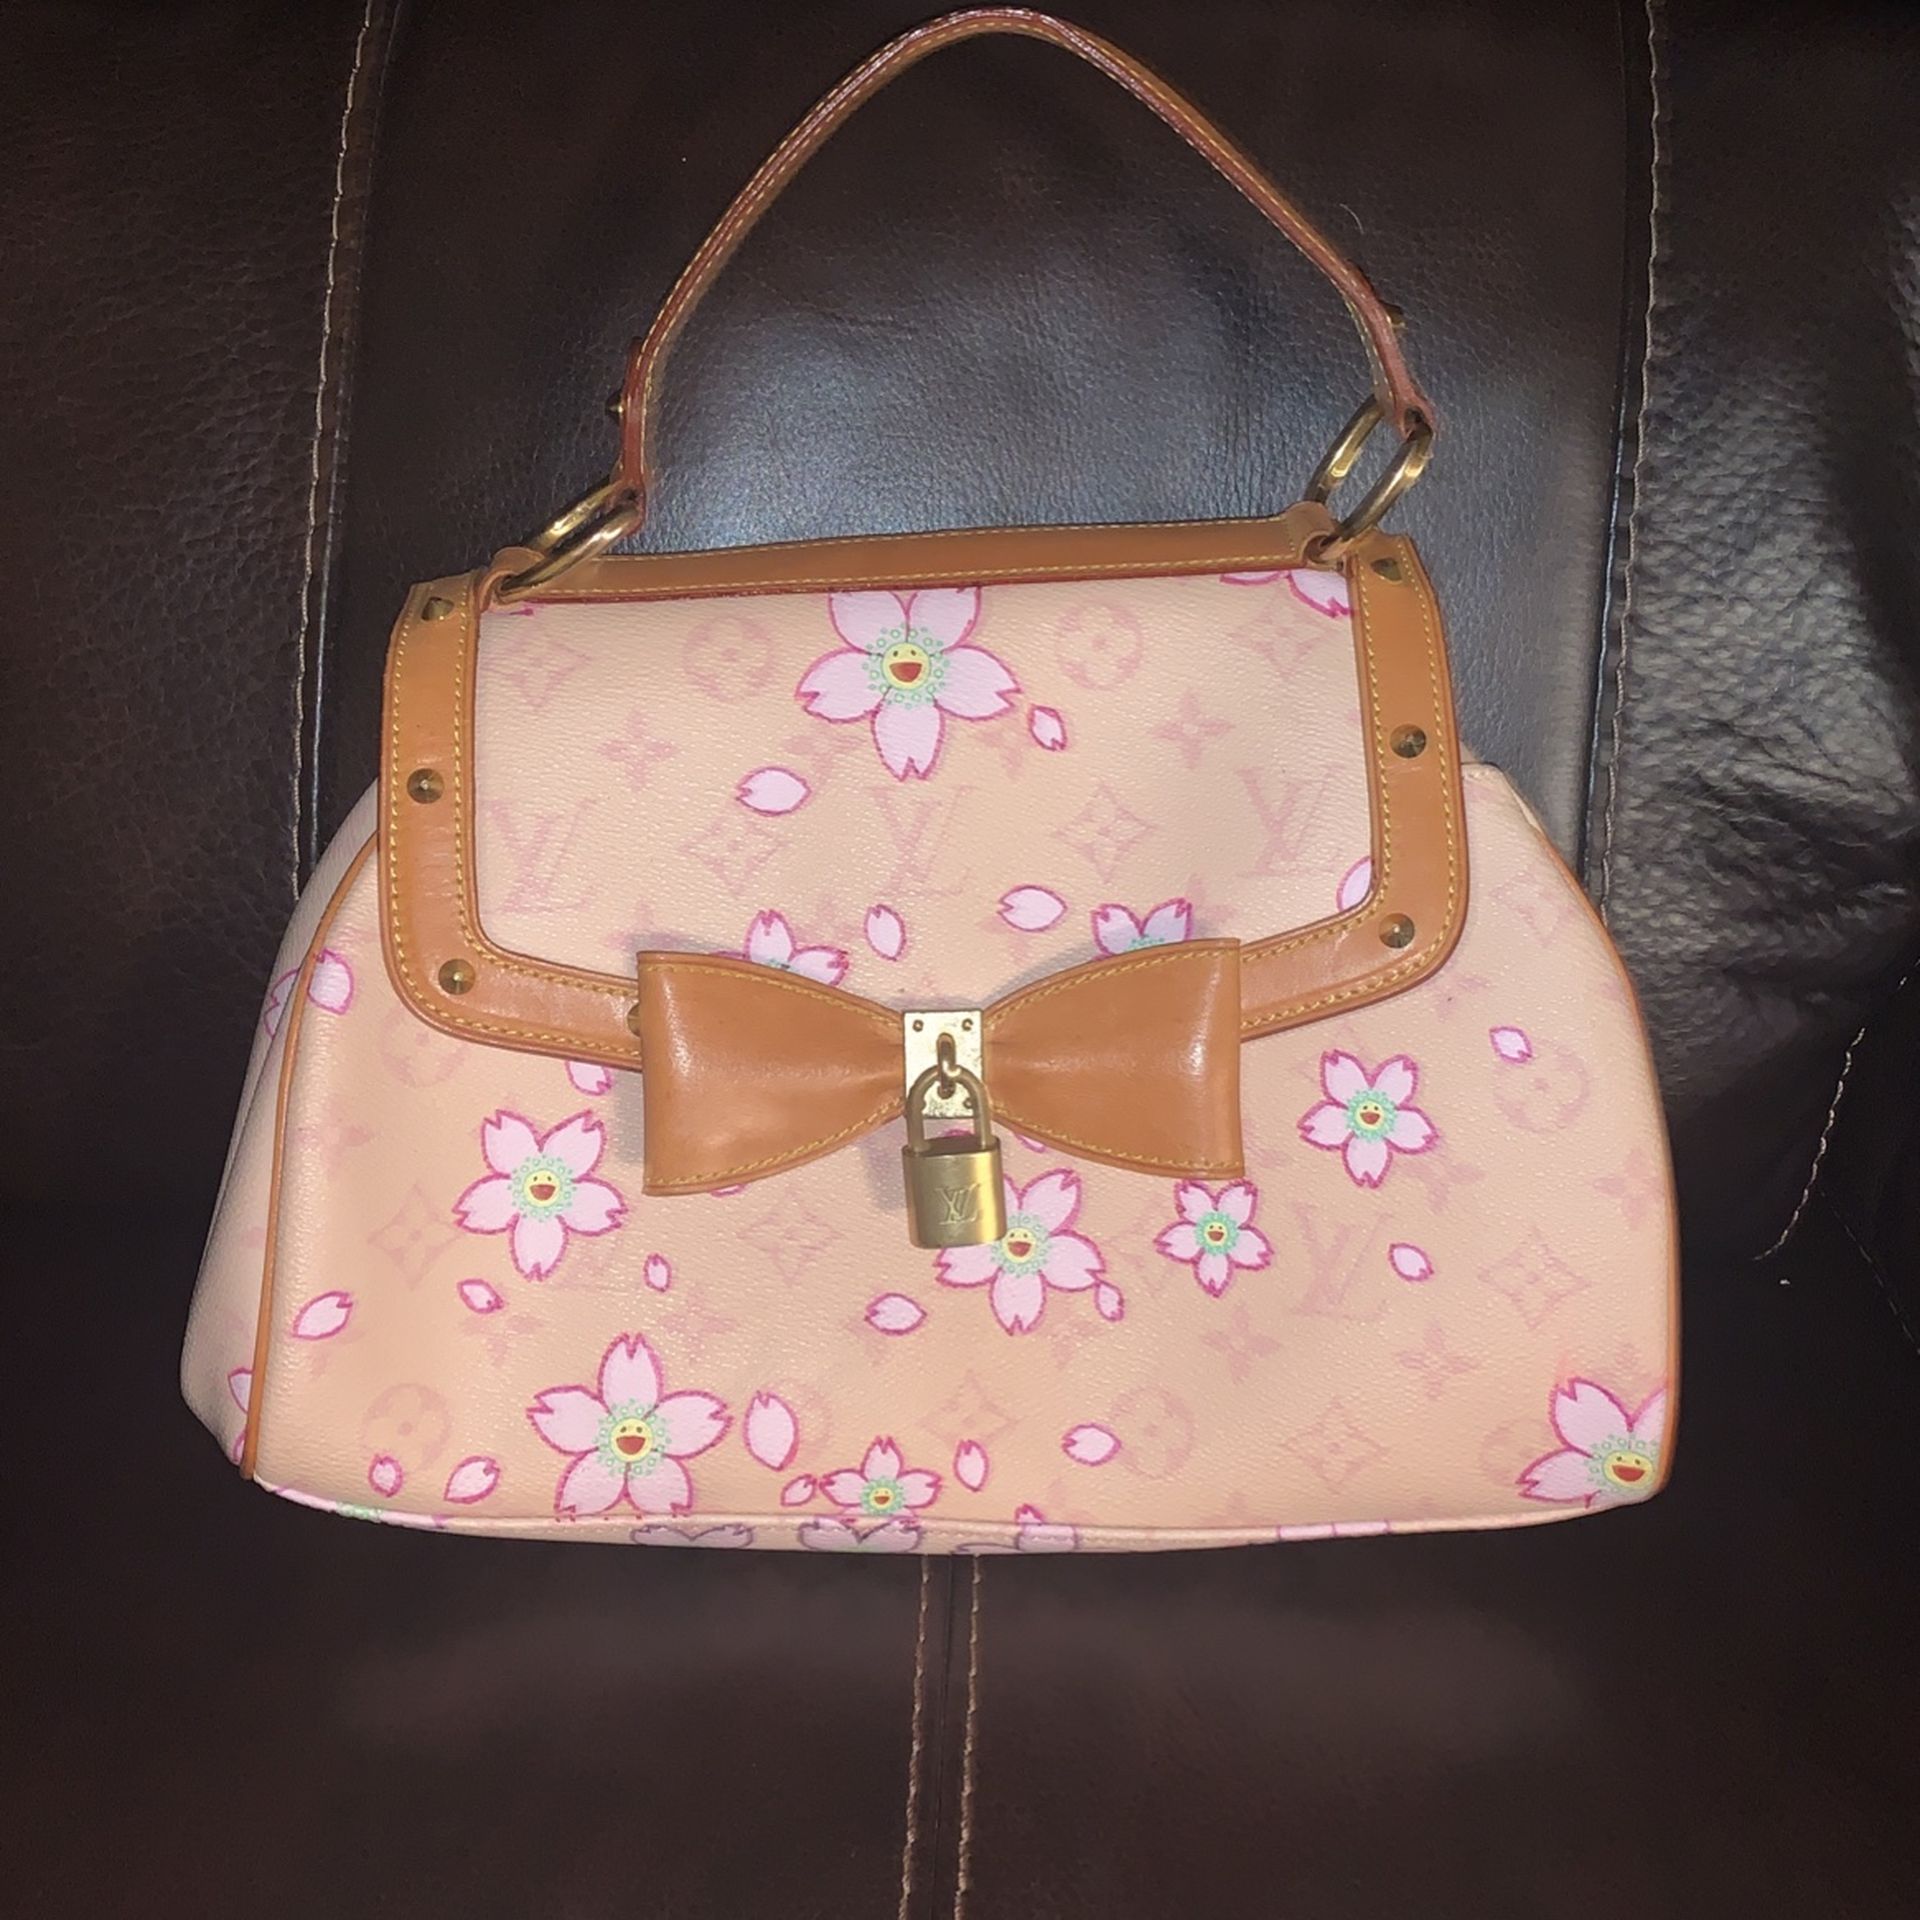 Louis Vuitton 2003 pre-owned Cherry Blossom crossbody bag - ShopStyle